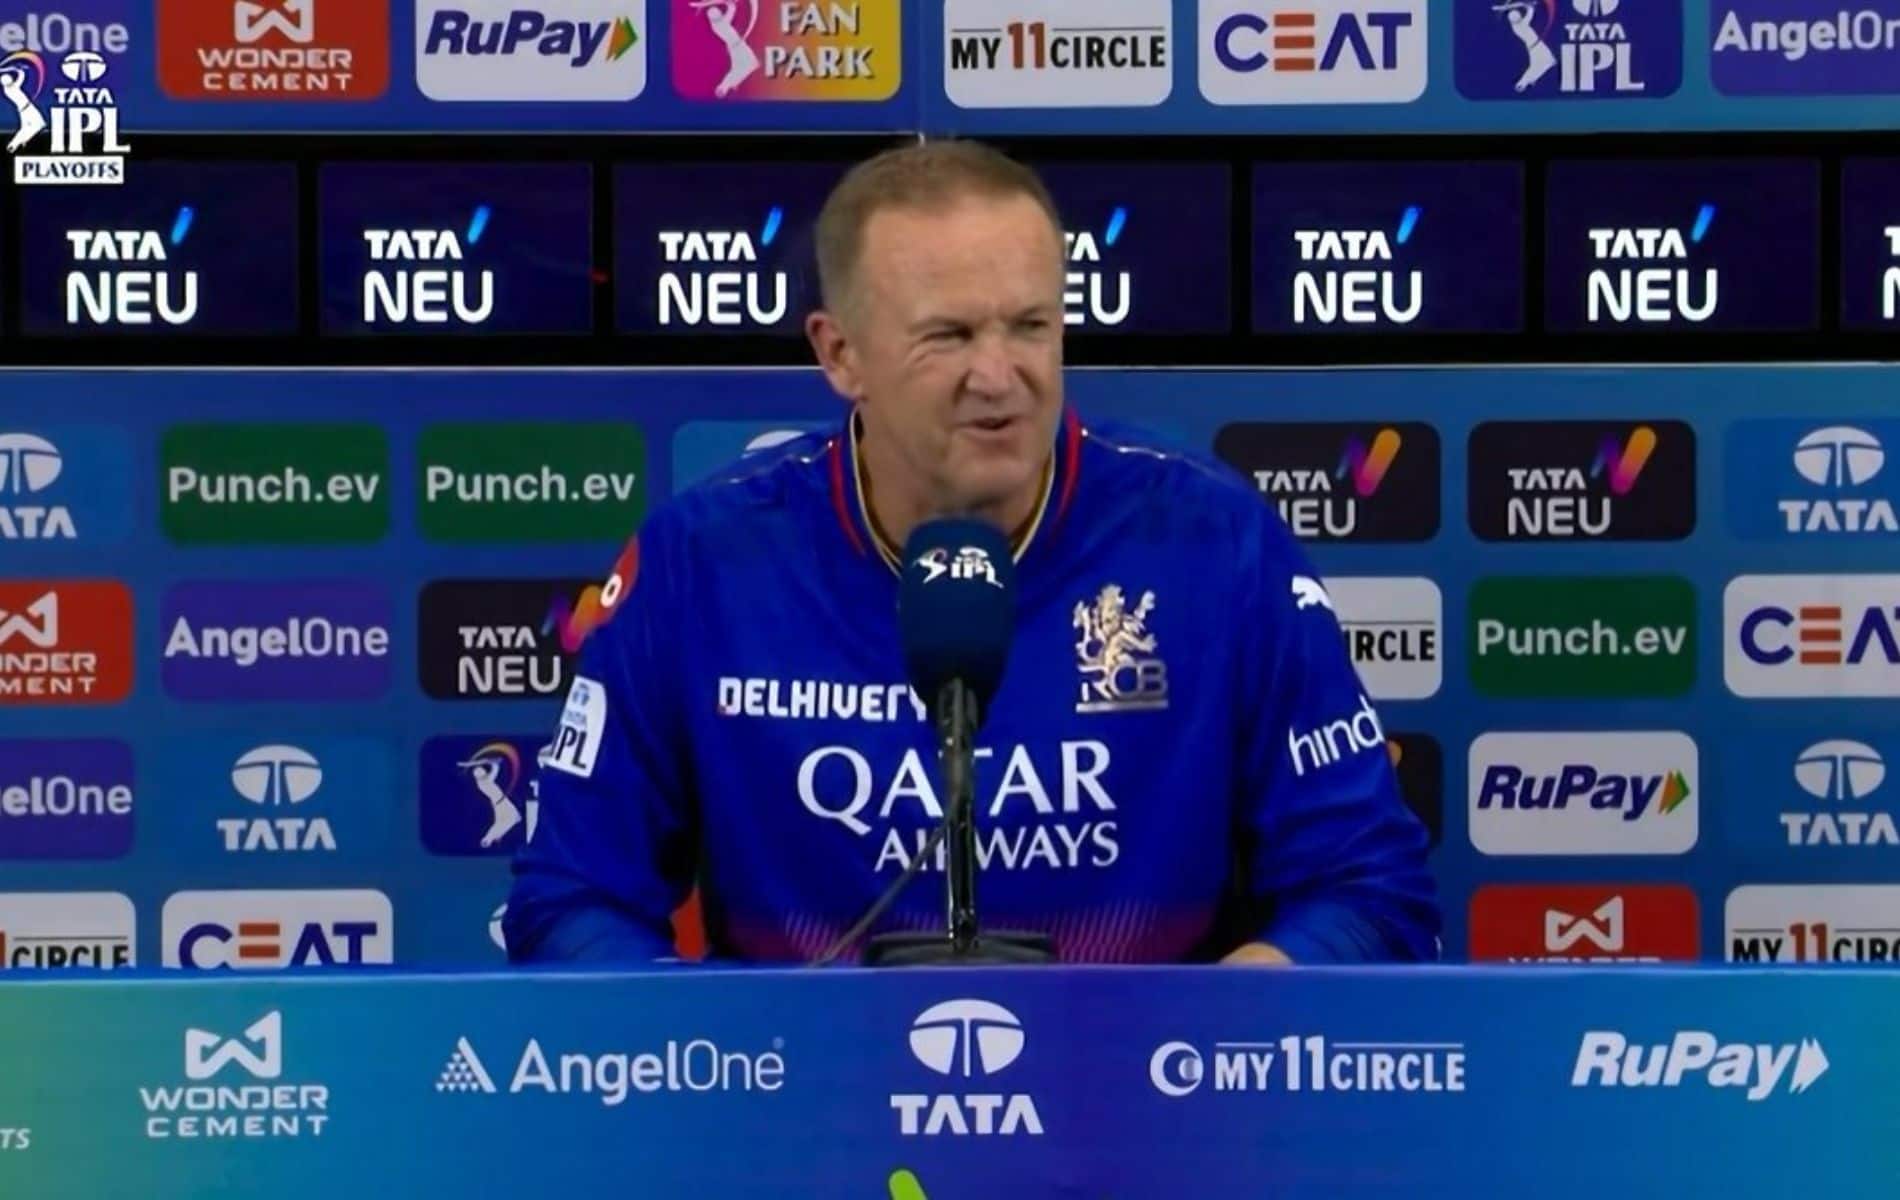 Andy Flower addresses media after RCB's exit from IPL (X)